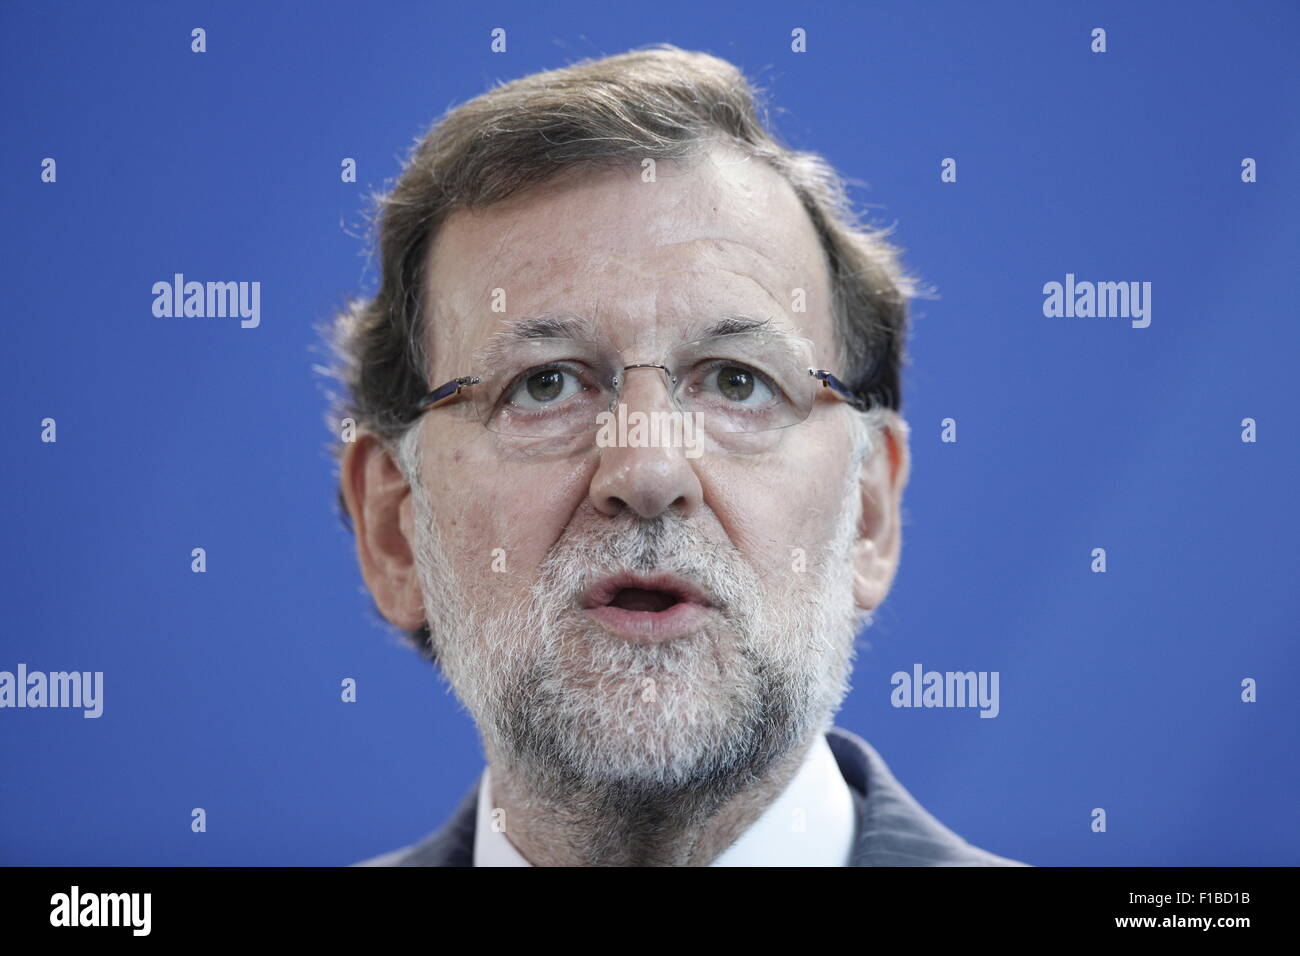 Berlin, Germany. 01st Sep, 2015. German Chancellor Angela Merkel together with Spanish Prime Minster Mariano Rajoy give a joint press conference at the German Chancellery in Berlin, German on september 01, 2015. / Picture:  Mariano Rajoy, Prime Minister of Spain, Credit:  Reynaldo Chaib Paganelli/Alamy Live News Stock Photo